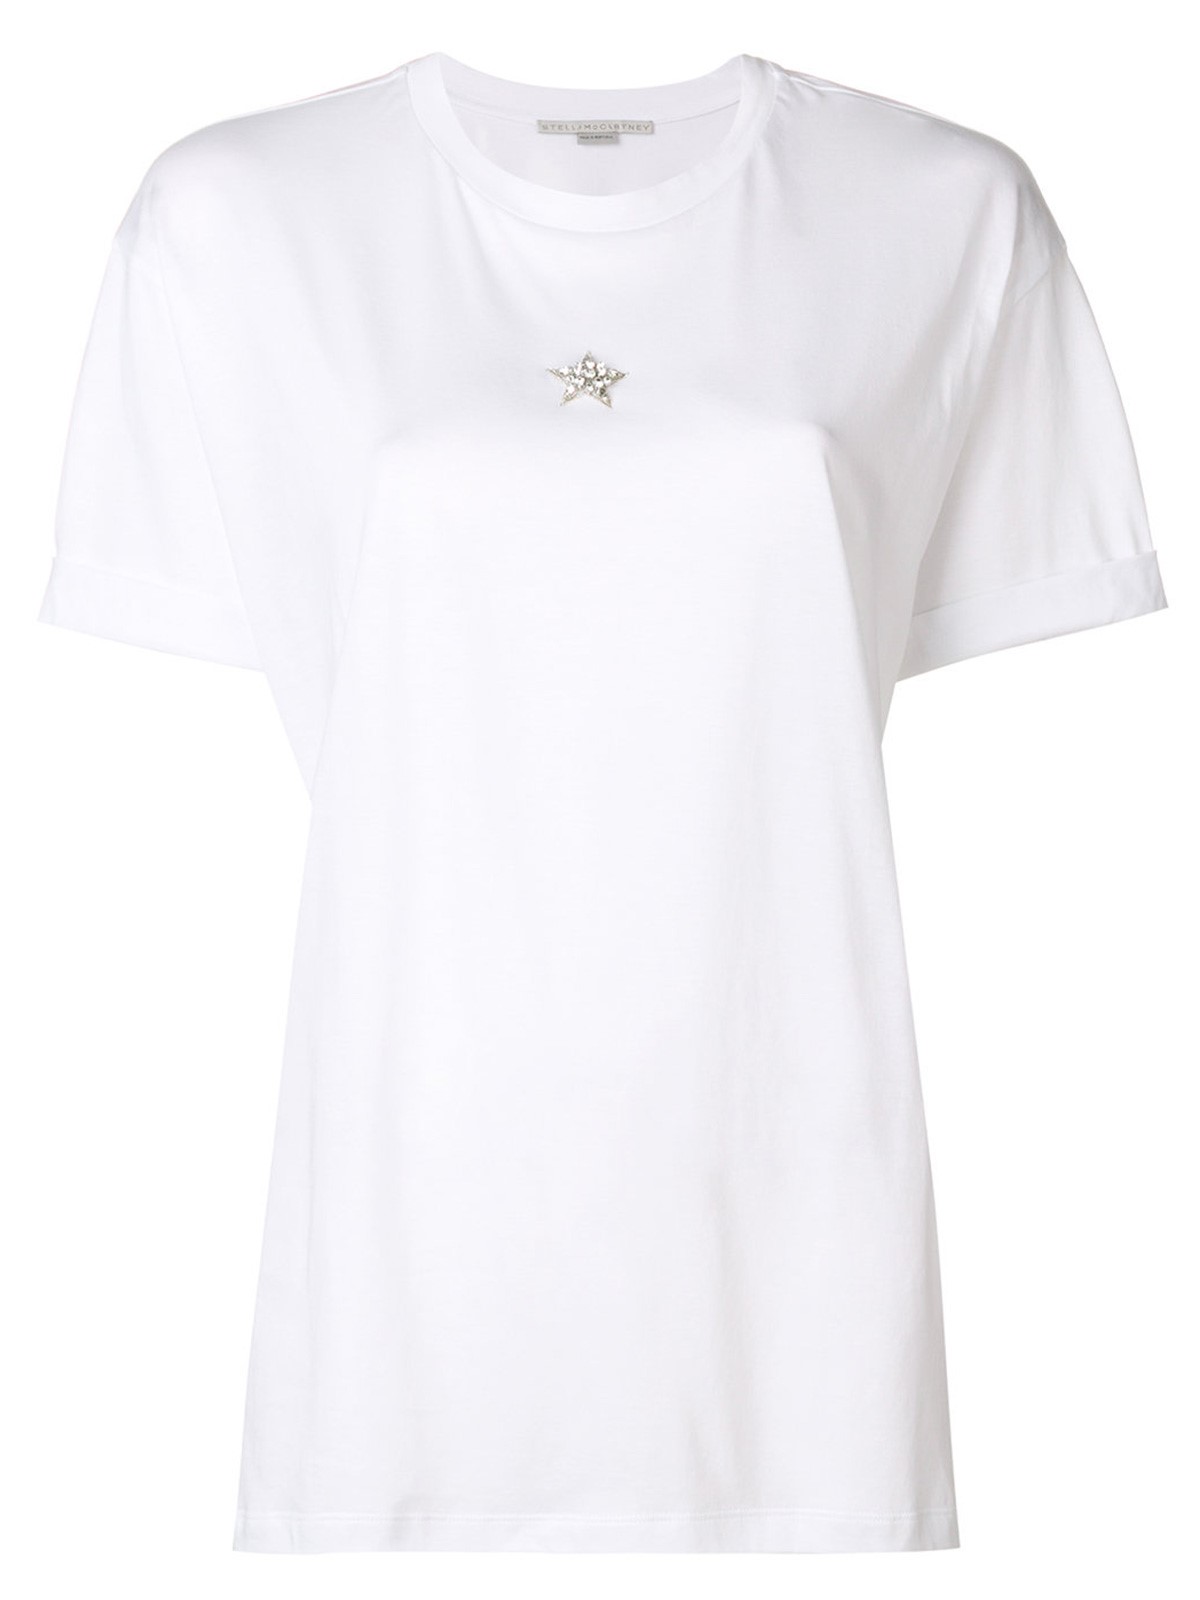 stella mccartney STAR T-SHIRT available on montiboutique.com - 23114